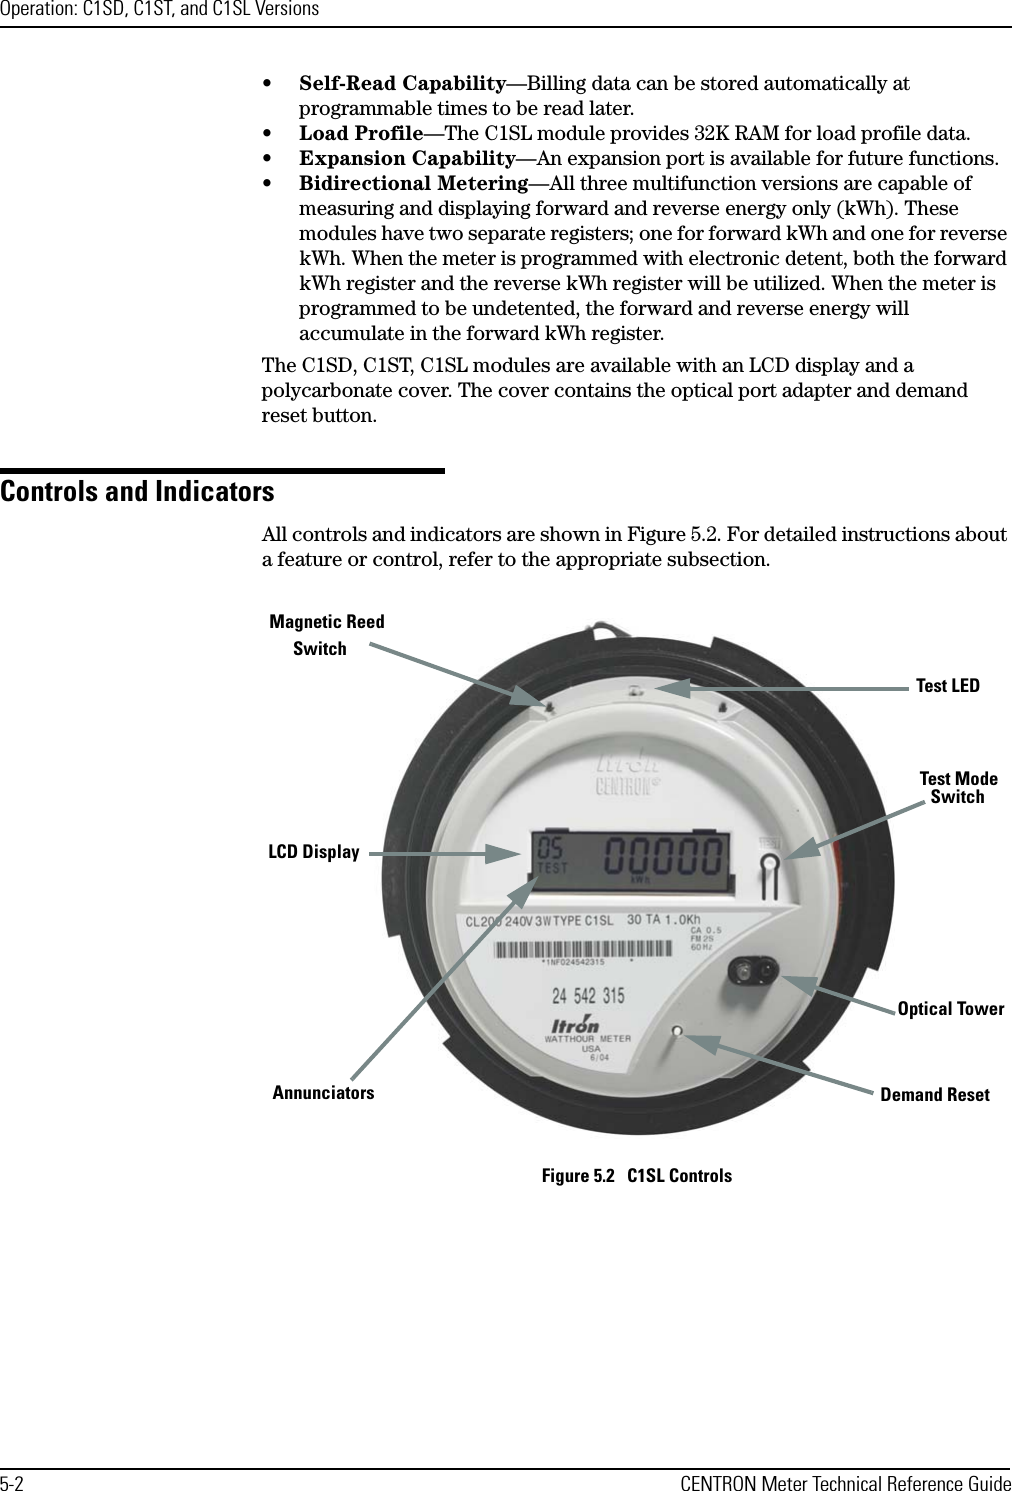 Operation: C1SD, C1ST, and C1SL Versions5-2 CENTRON Meter Technical Reference Guide•Self-Read Capability—Billing data can be stored automatically at programmable times to be read later.•Load Profile—The C1SL module provides 32K RAM for load profile data.•Expansion Capability—An expansion port is available for future functions.•Bidirectional Metering—All three multifunction versions are capable of measuring and displaying forward and reverse energy only (kWh). These modules have two separate registers; one for forward kWh and one for reverse kWh. When the meter is programmed with electronic detent, both the forward kWh register and the reverse kWh register will be utilized. When the meter is programmed to be undetented, the forward and reverse energy will accumulate in the forward kWh register.The C1SD, C1ST, C1SL modules are available with an LCD display and a polycarbonate cover. The cover contains the optical port adapter and demand reset button.Controls and IndicatorsAll controls and indicators are shown in Figure 5.2. For detailed instructions about a feature or control, refer to the appropriate subsection.Figure 5.2   C1SL ControlsLCD DisplayDemand ResetTest LEDOptical TowerAnnunciatorsMagnetic Reed Test Mode Switch Switch